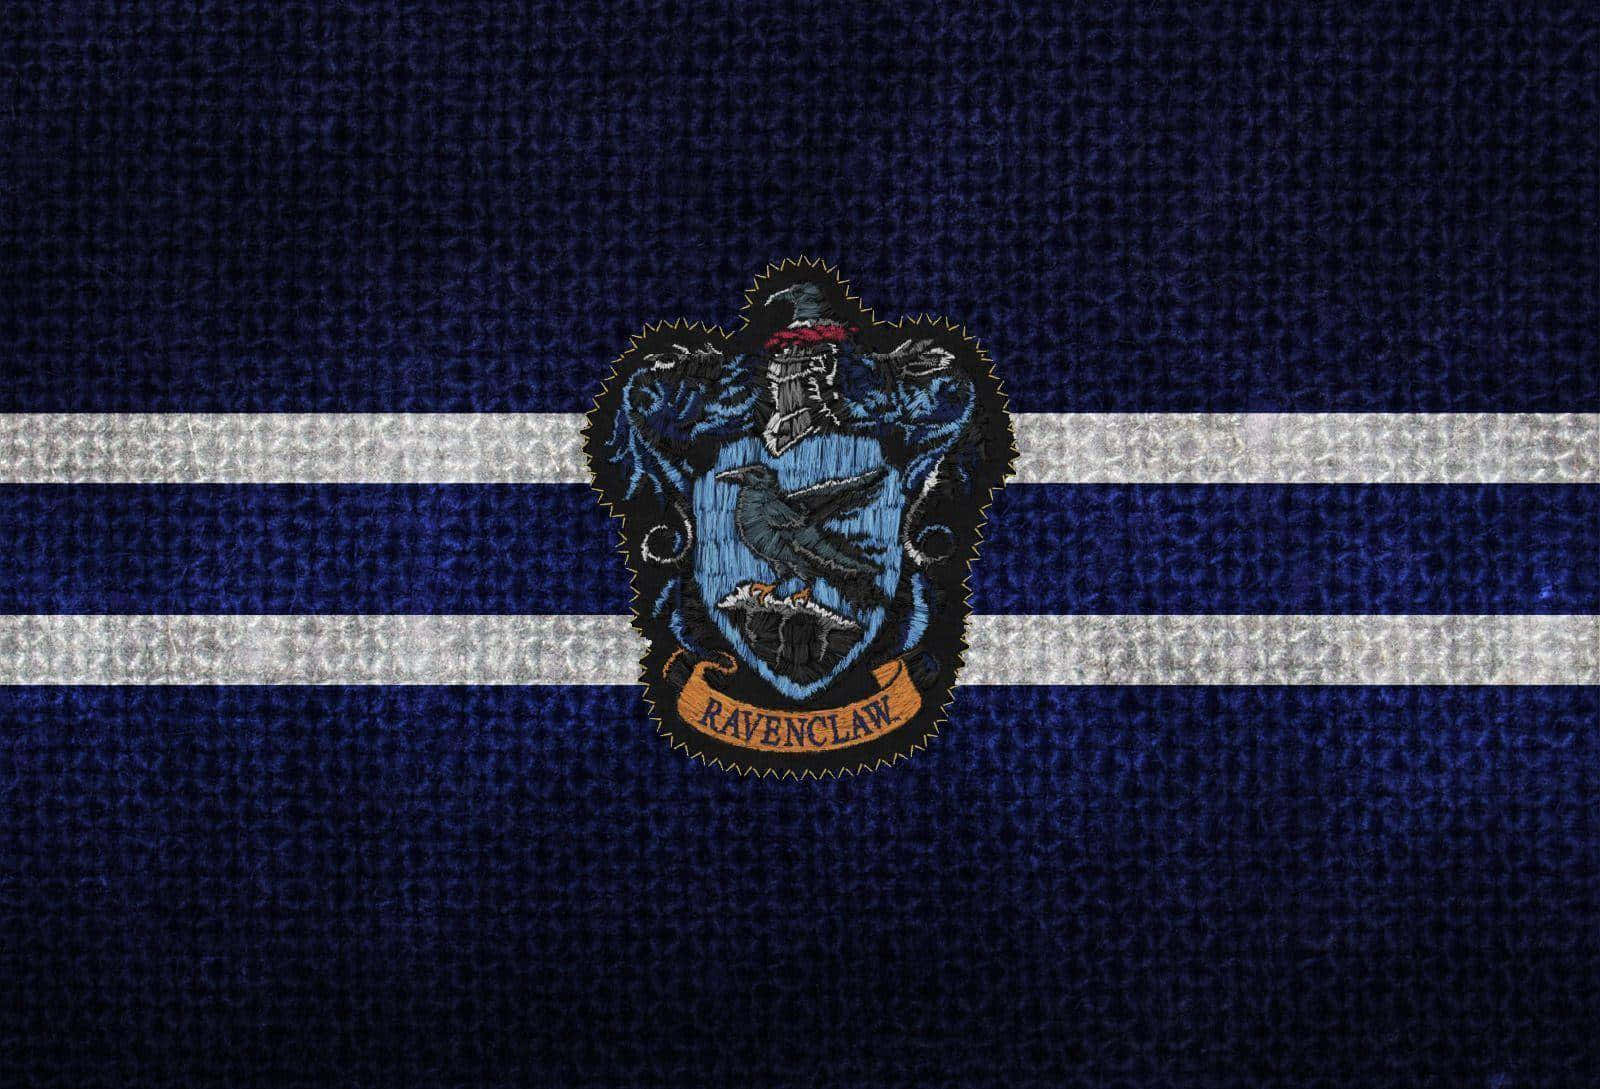 Unite under the Ravenclaw House Of Wisdom Wallpaper